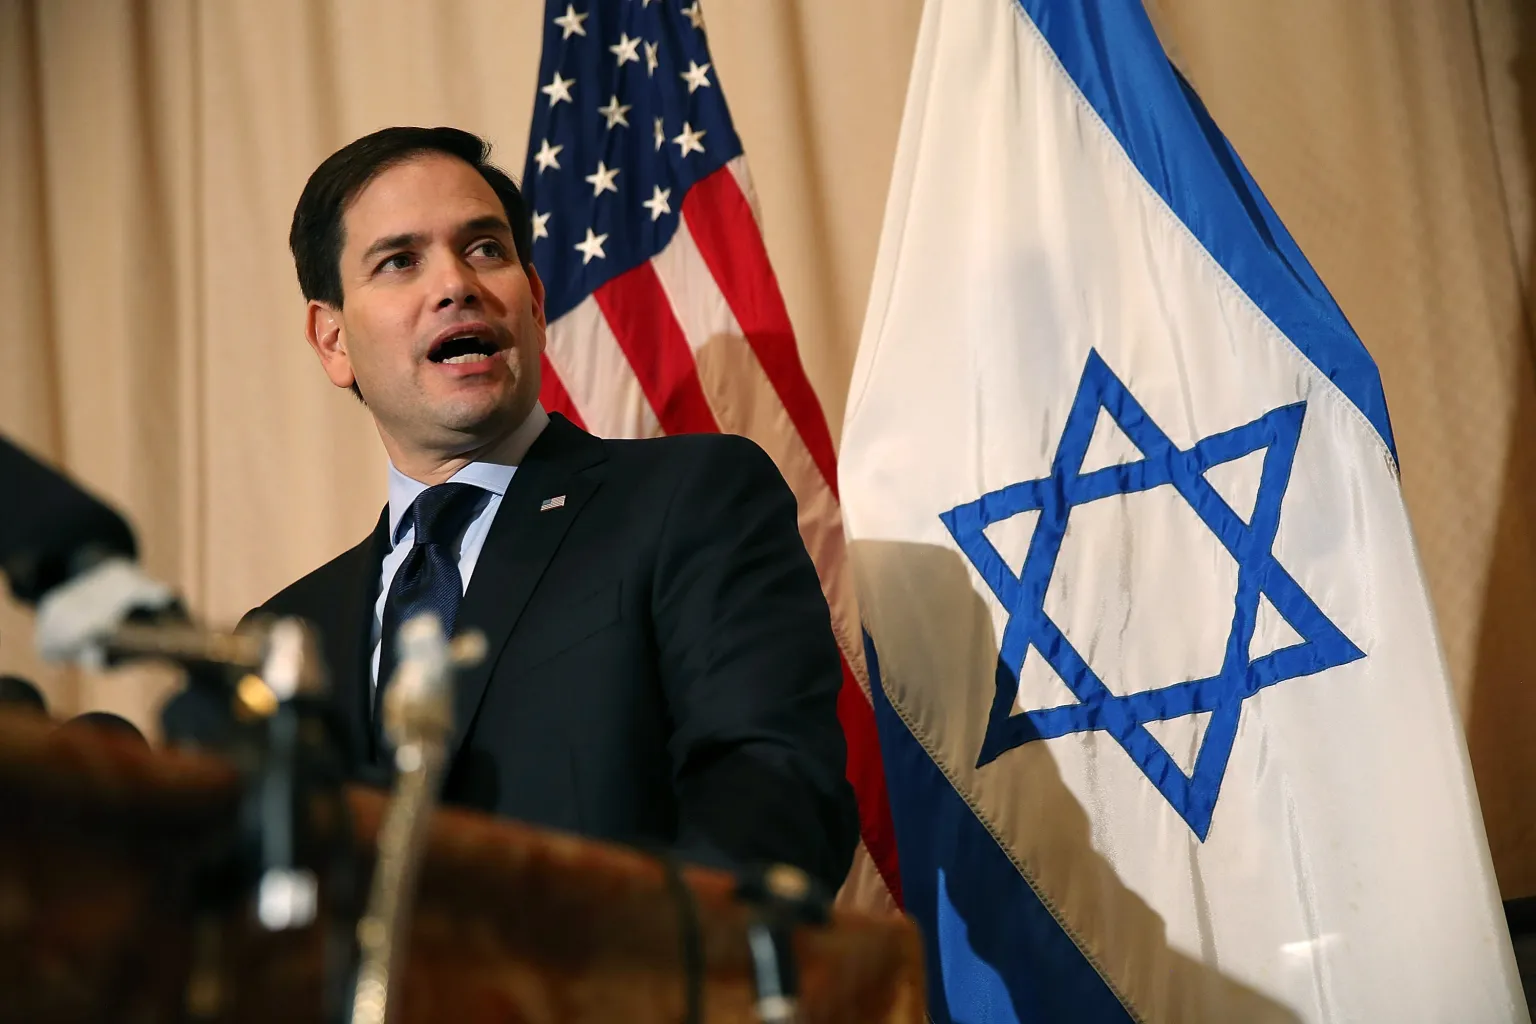 Visas to be Suspended for Those Who Back Hamas’ Attack on Israel - Rubio